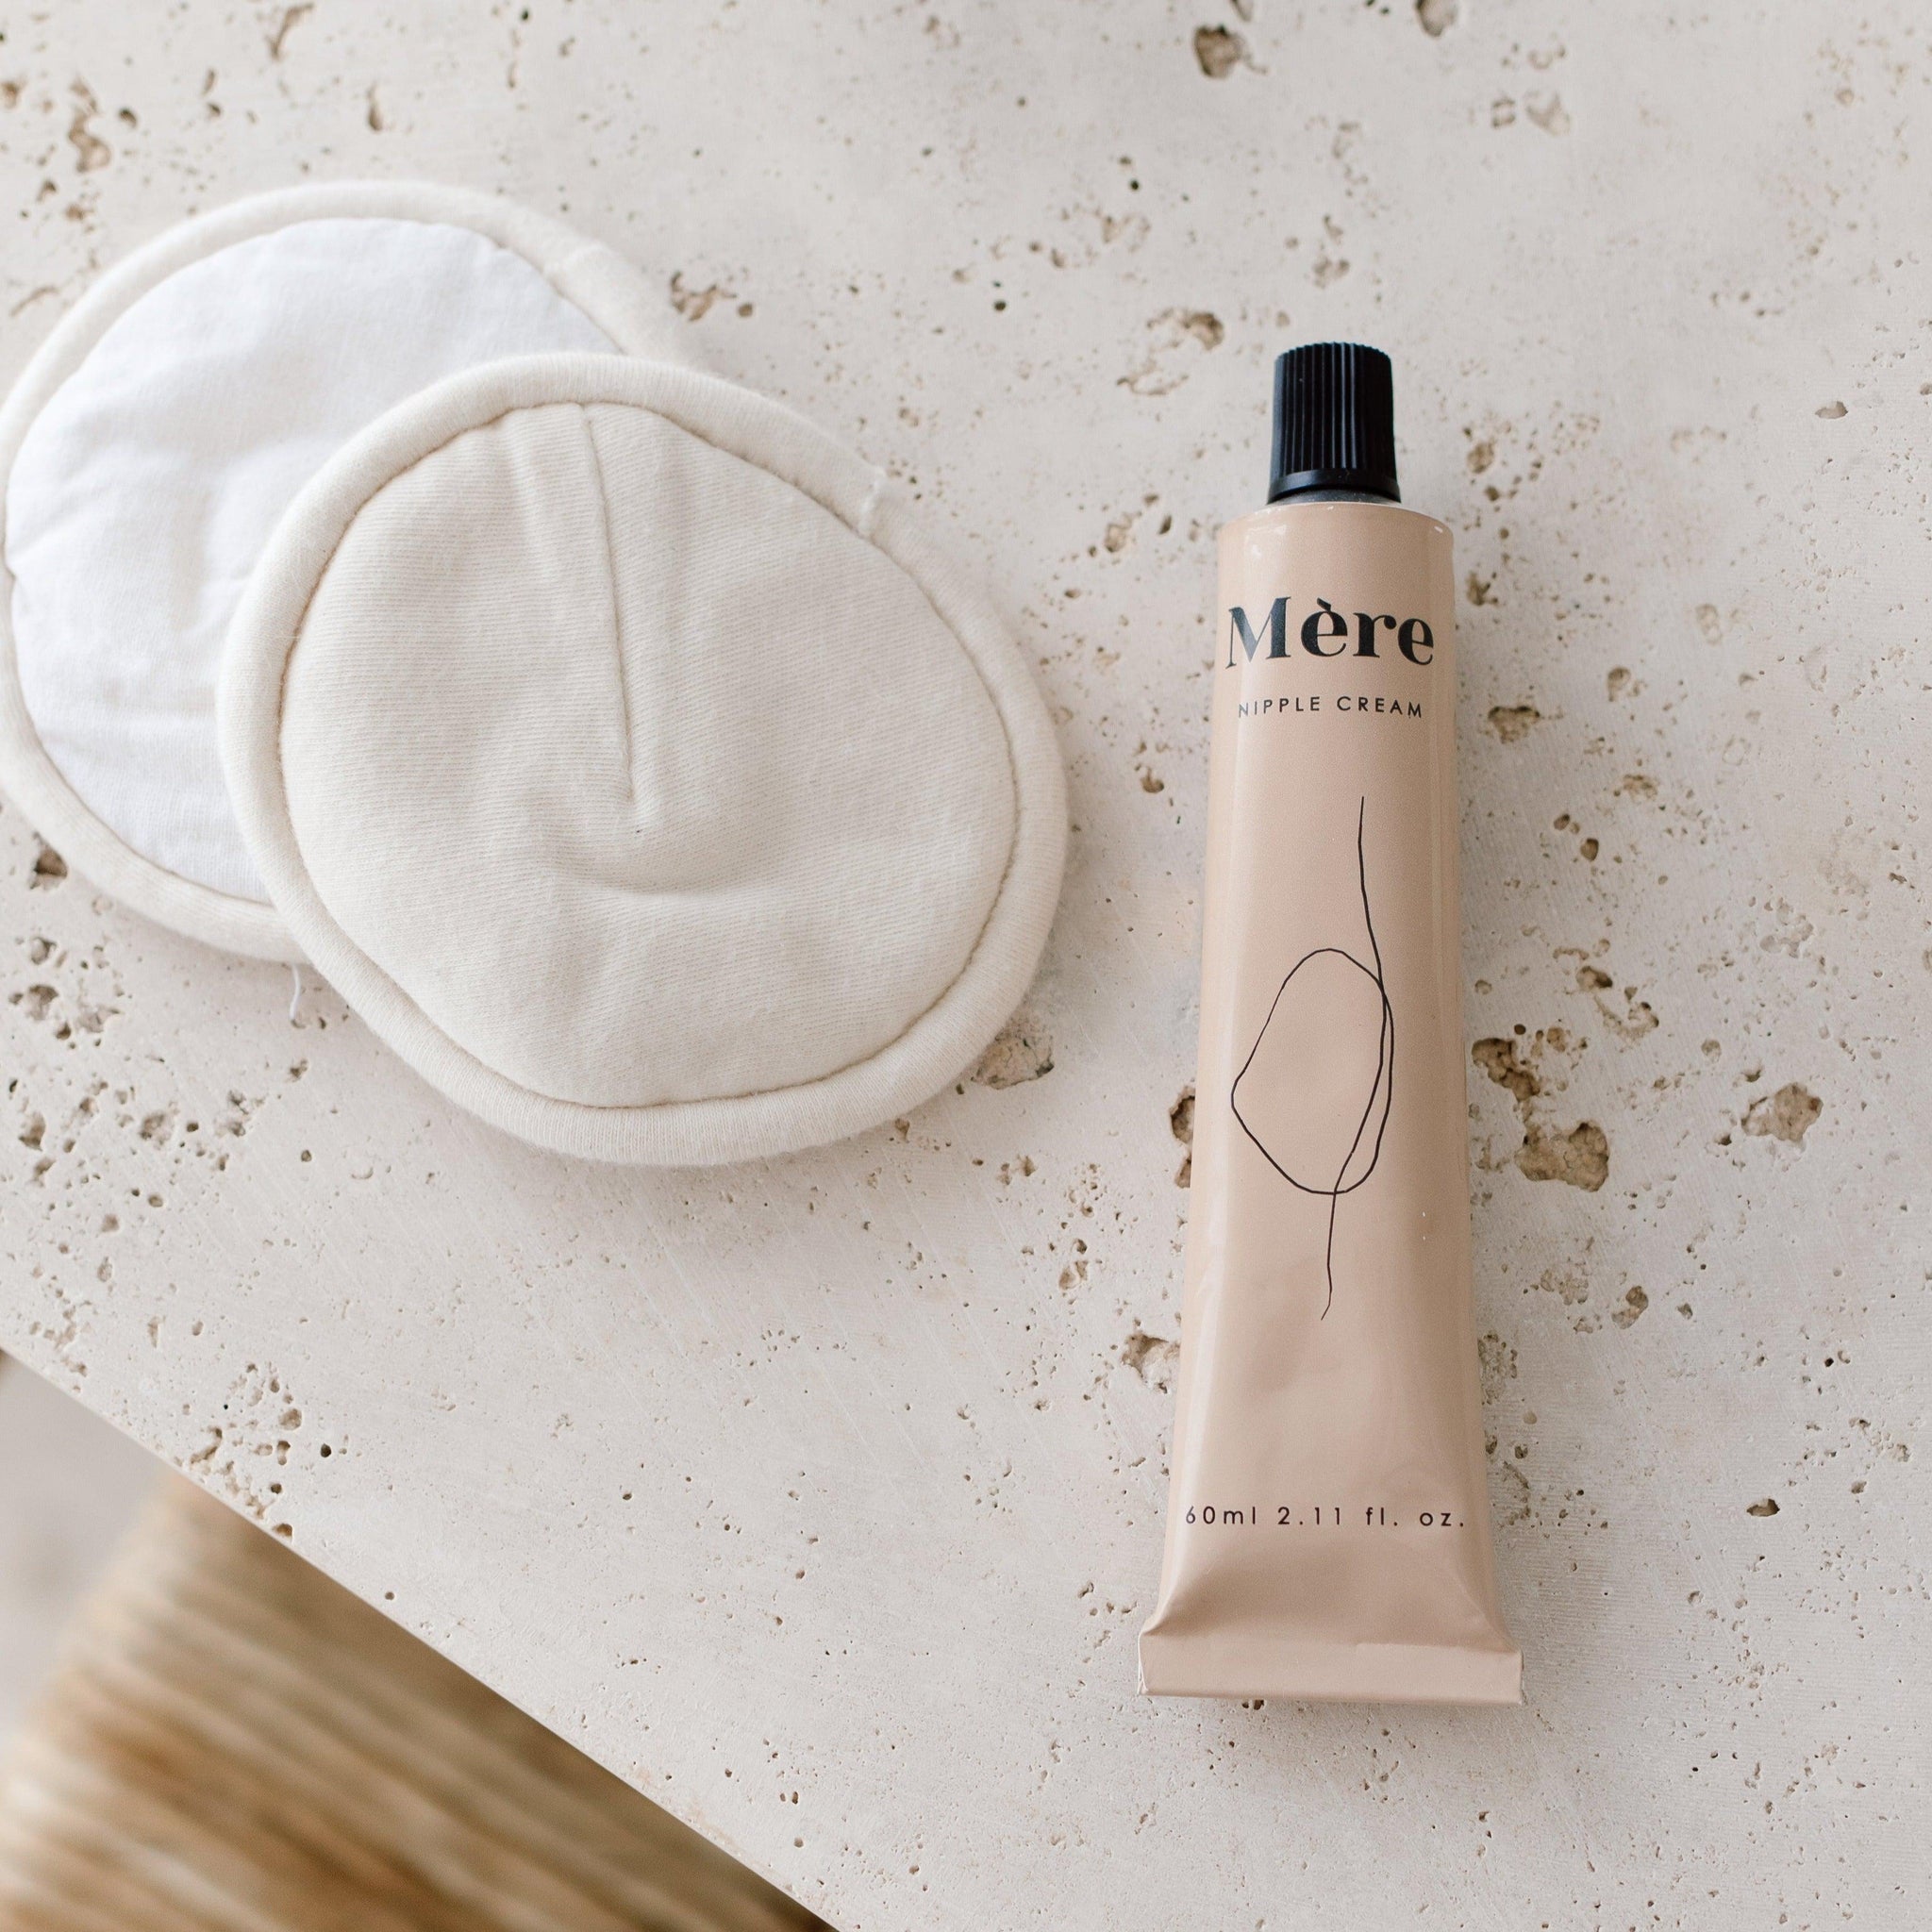 This beautifully formulated, non-greasy formulation of moisturising active botanicals naturally soothes, heals and hydrates. Mère Nipple Cream has no added fragrances, so the smell of Mum’s milk isn’t affected. For your convenience, this cream does not need to be removed before a feed.